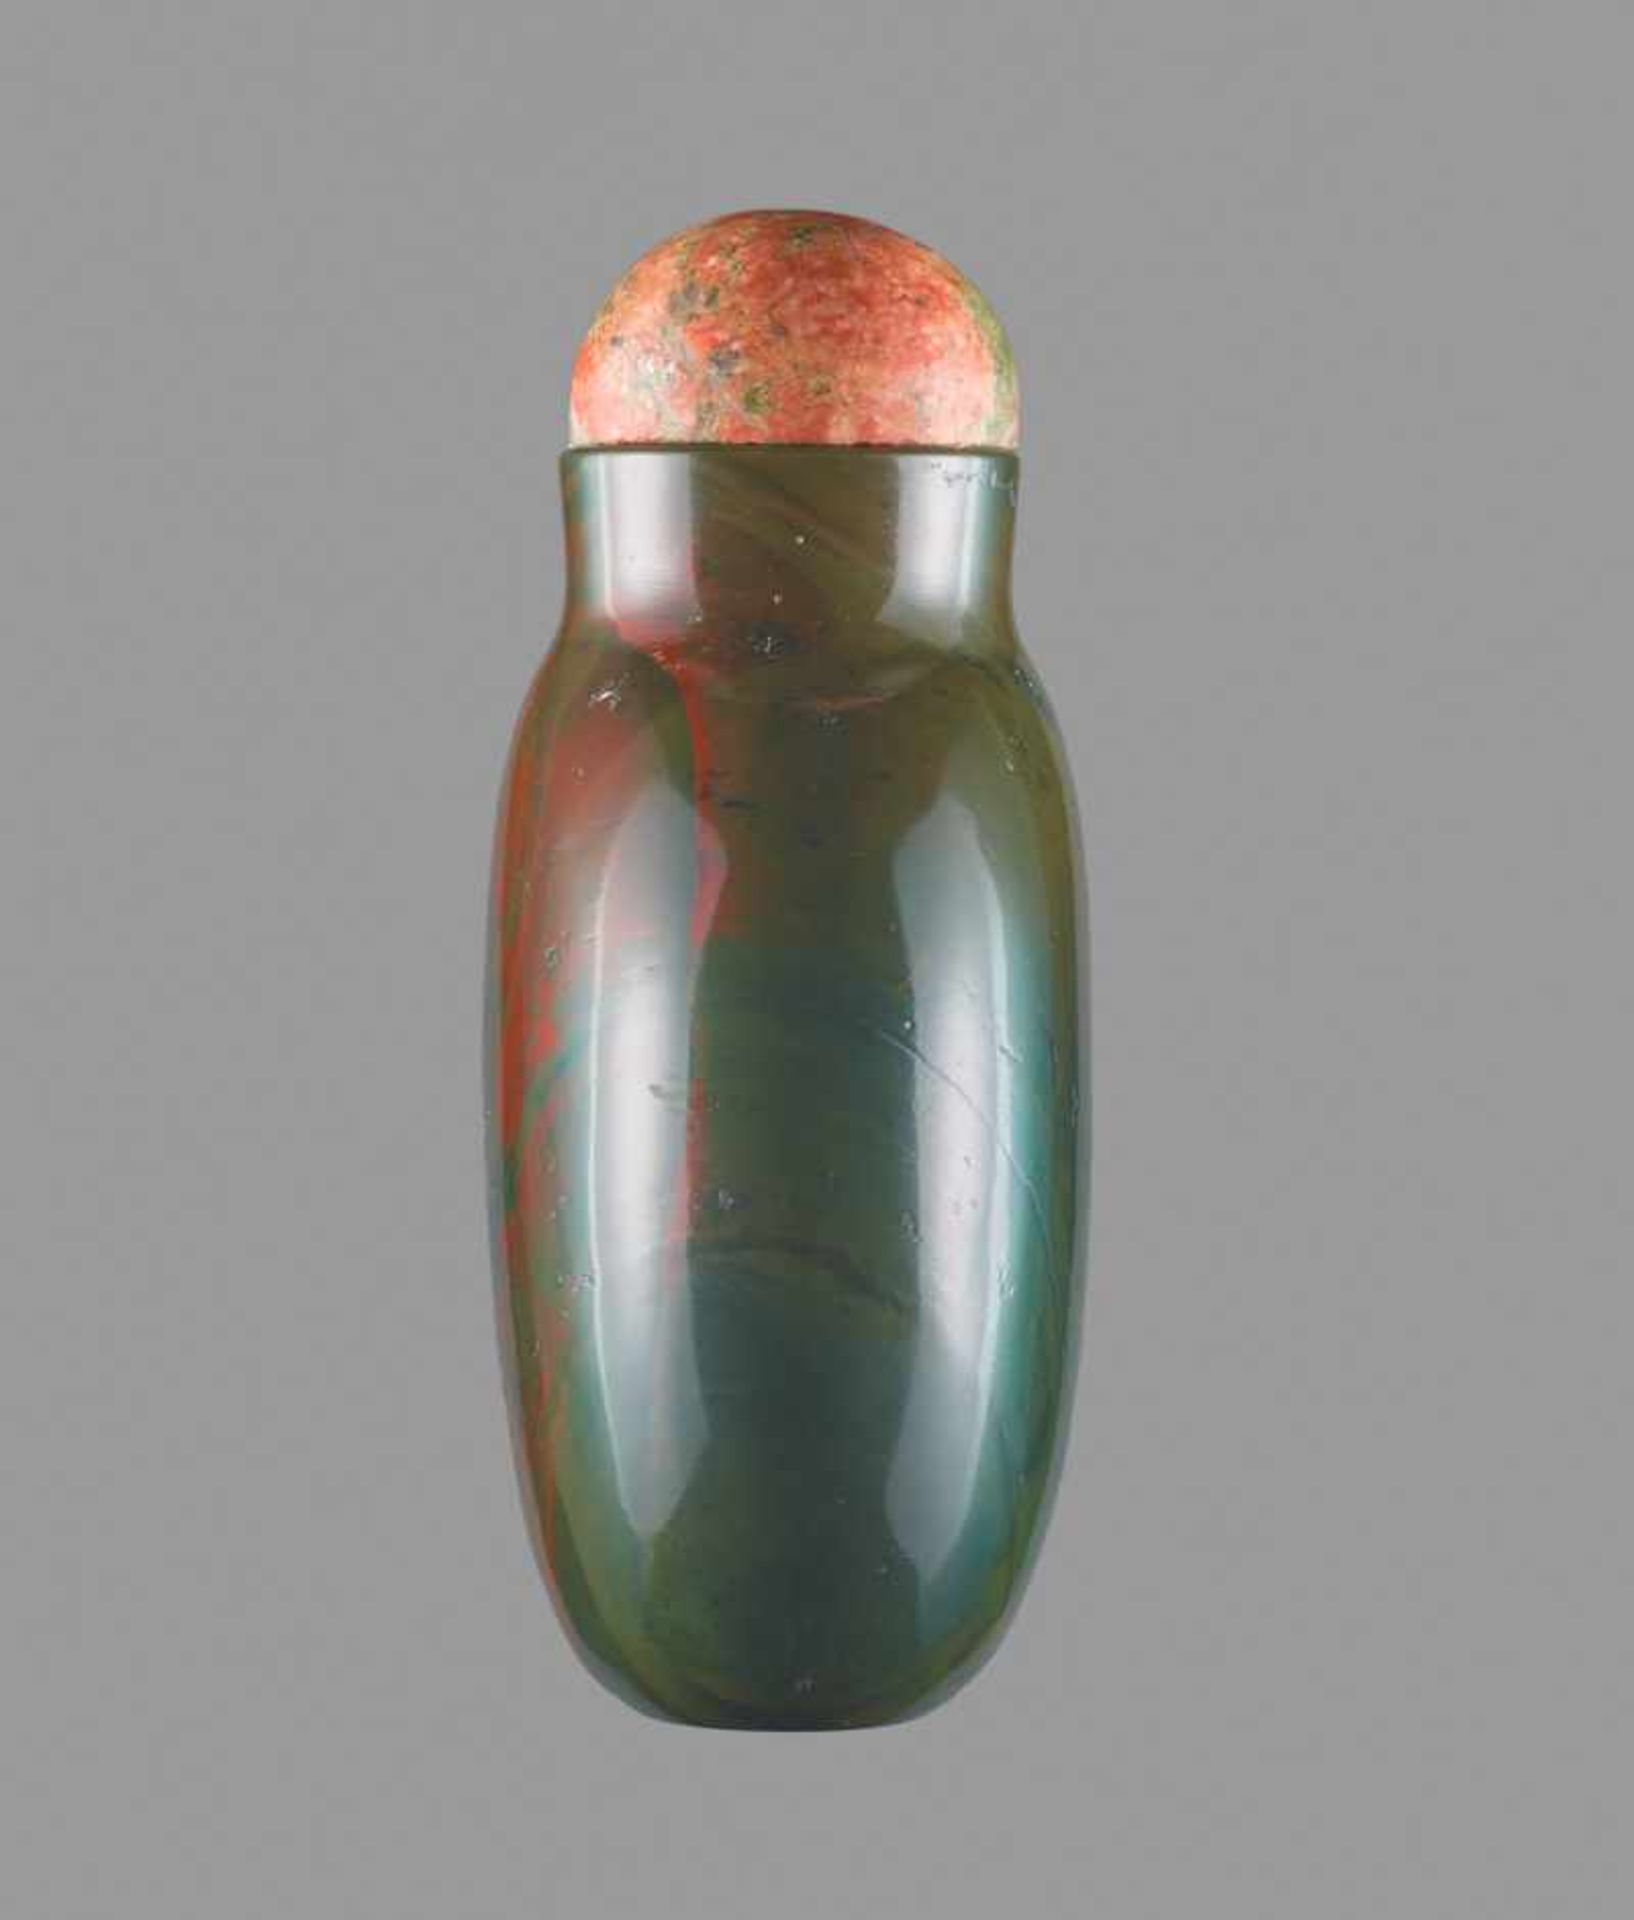 A JASPER SNUFF BOTTLE, QING DYNASTY Jasper (heliotrope), the untreated stone with an even and smooth - Image 4 of 6